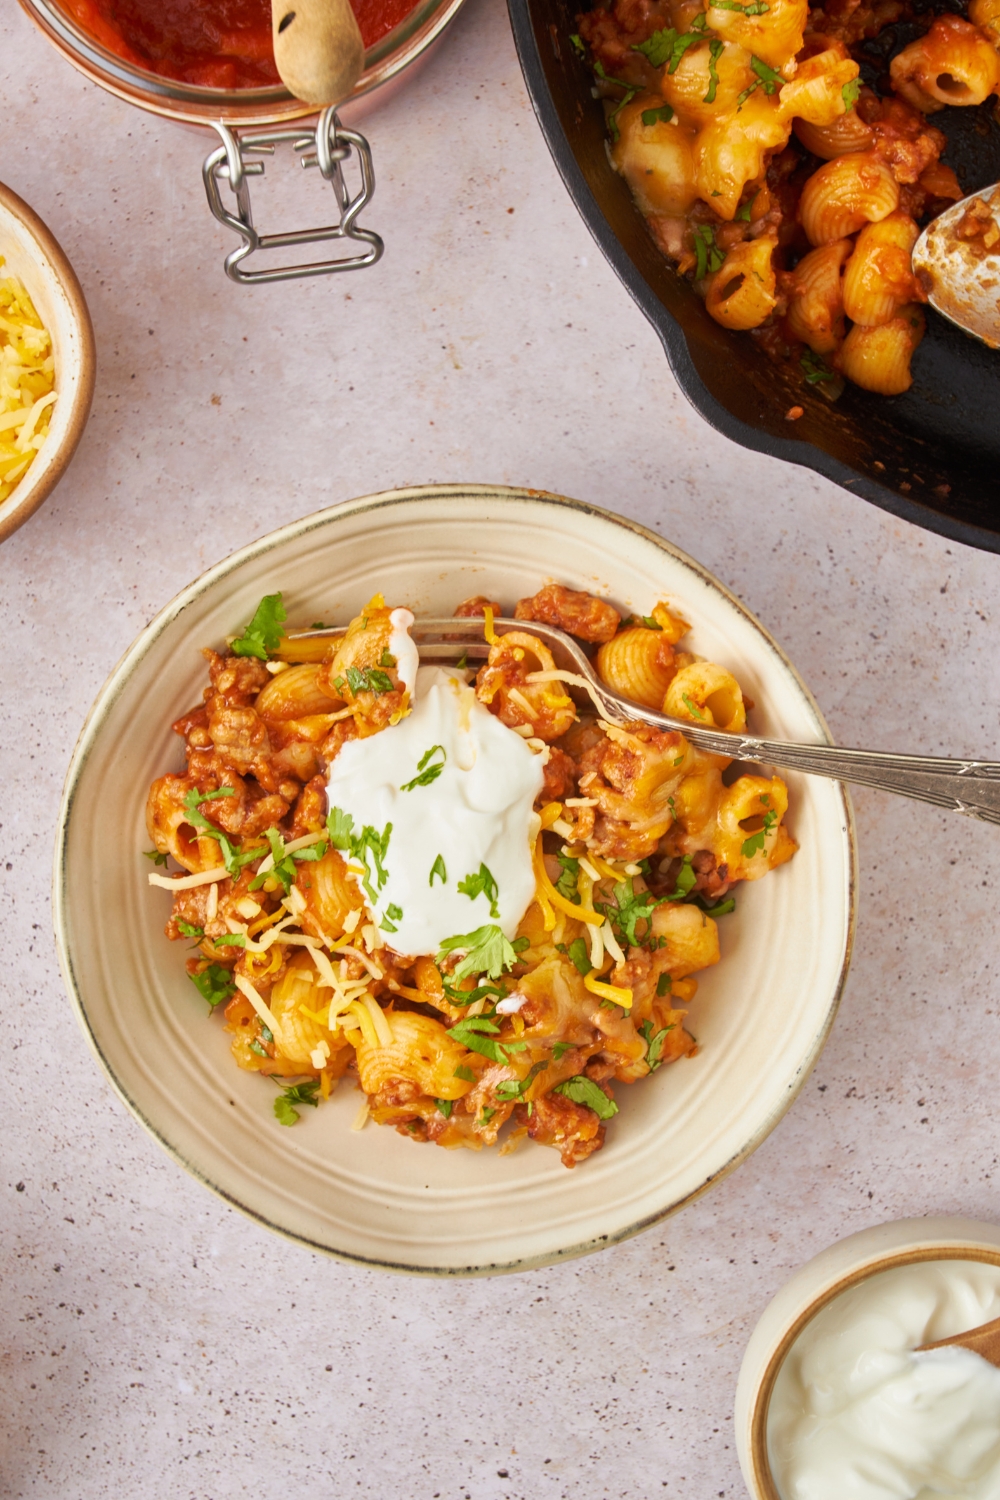 A bowl of taco pasta casserole topped with shredded cheese, fresh green herbs, and sour cream.